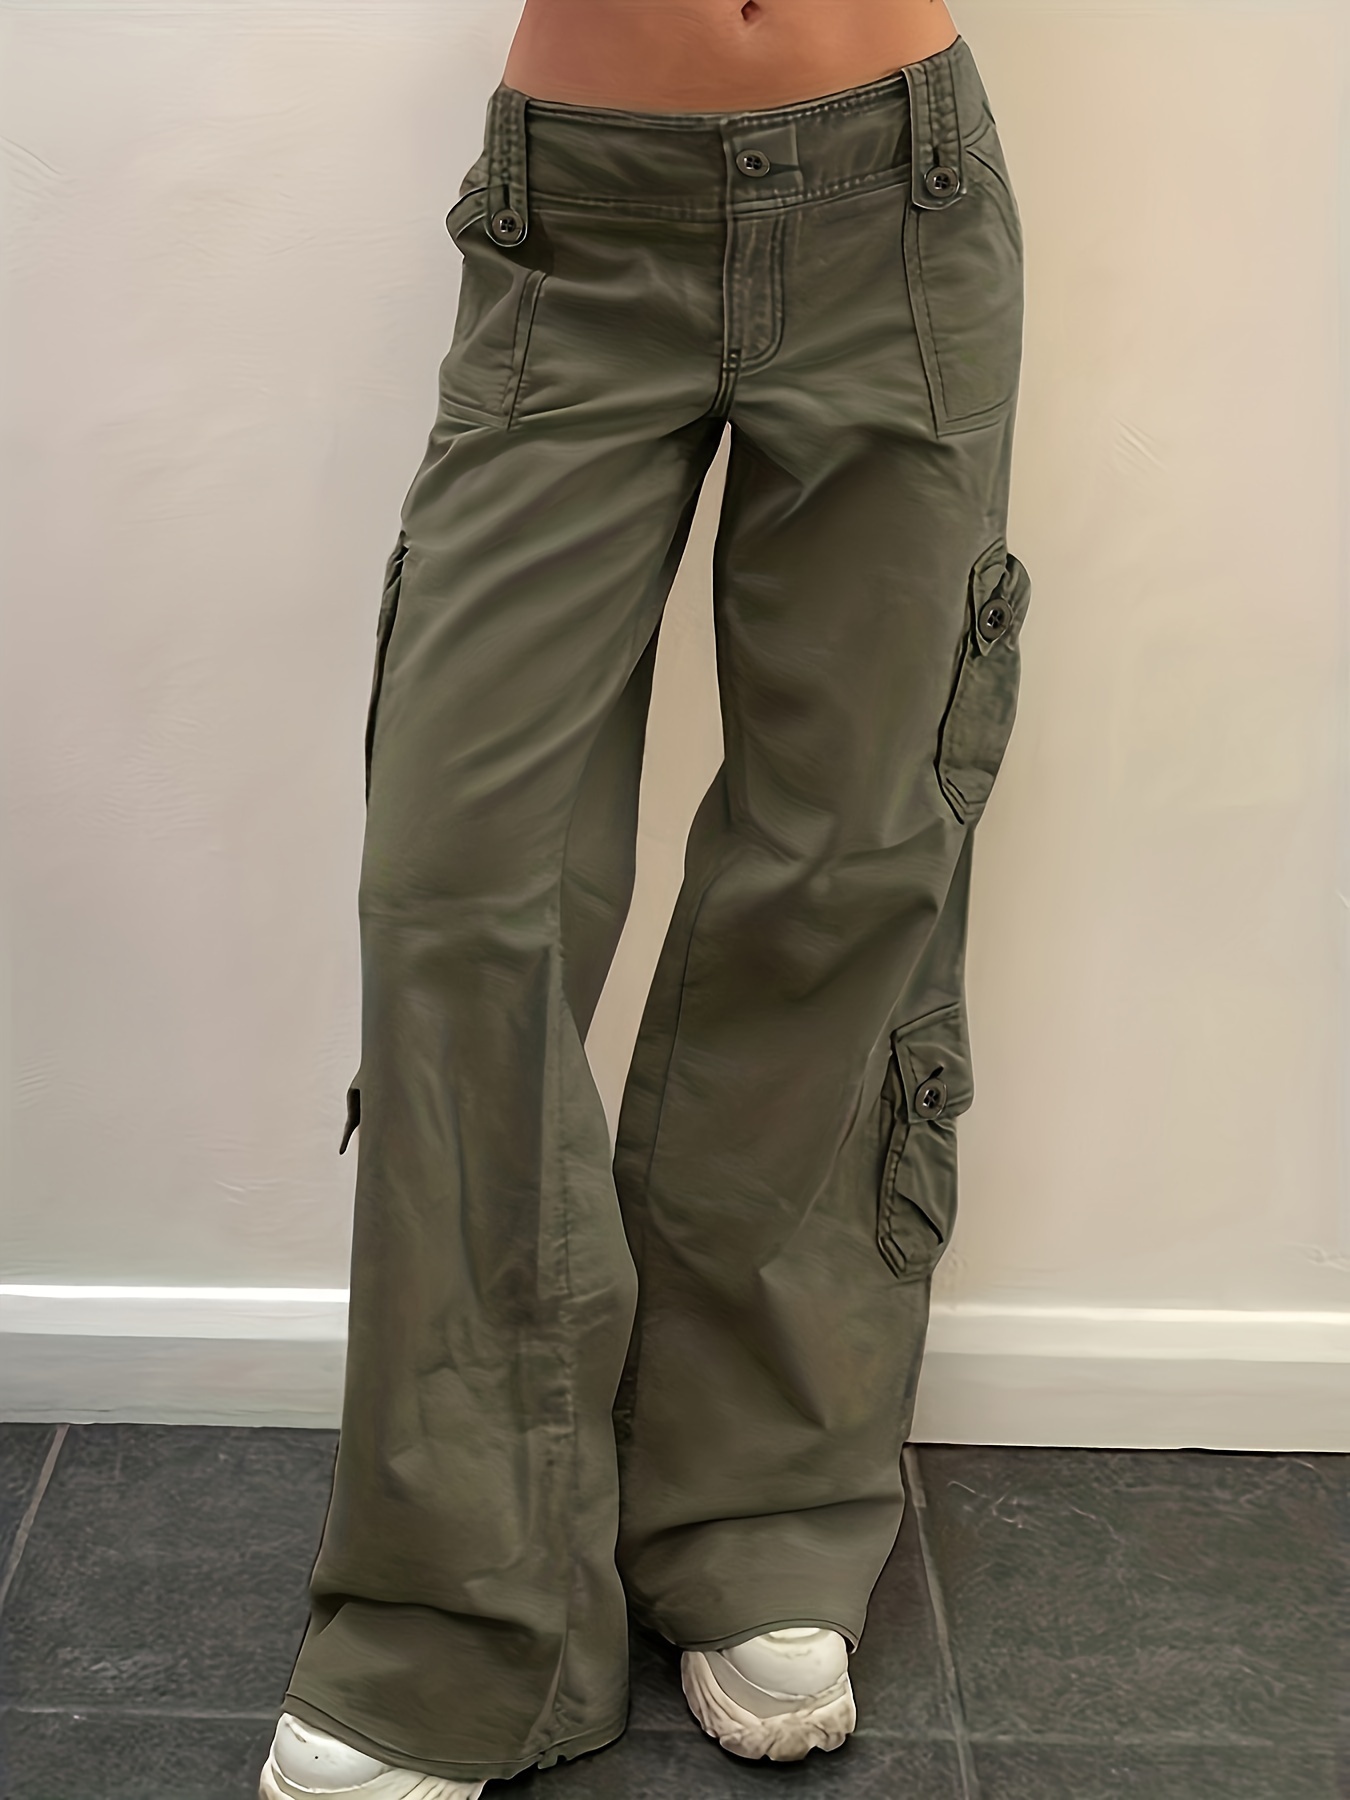 Womens Cargo Pants Combat Pockets High Waist Slim Trousers Loose Fit Casual